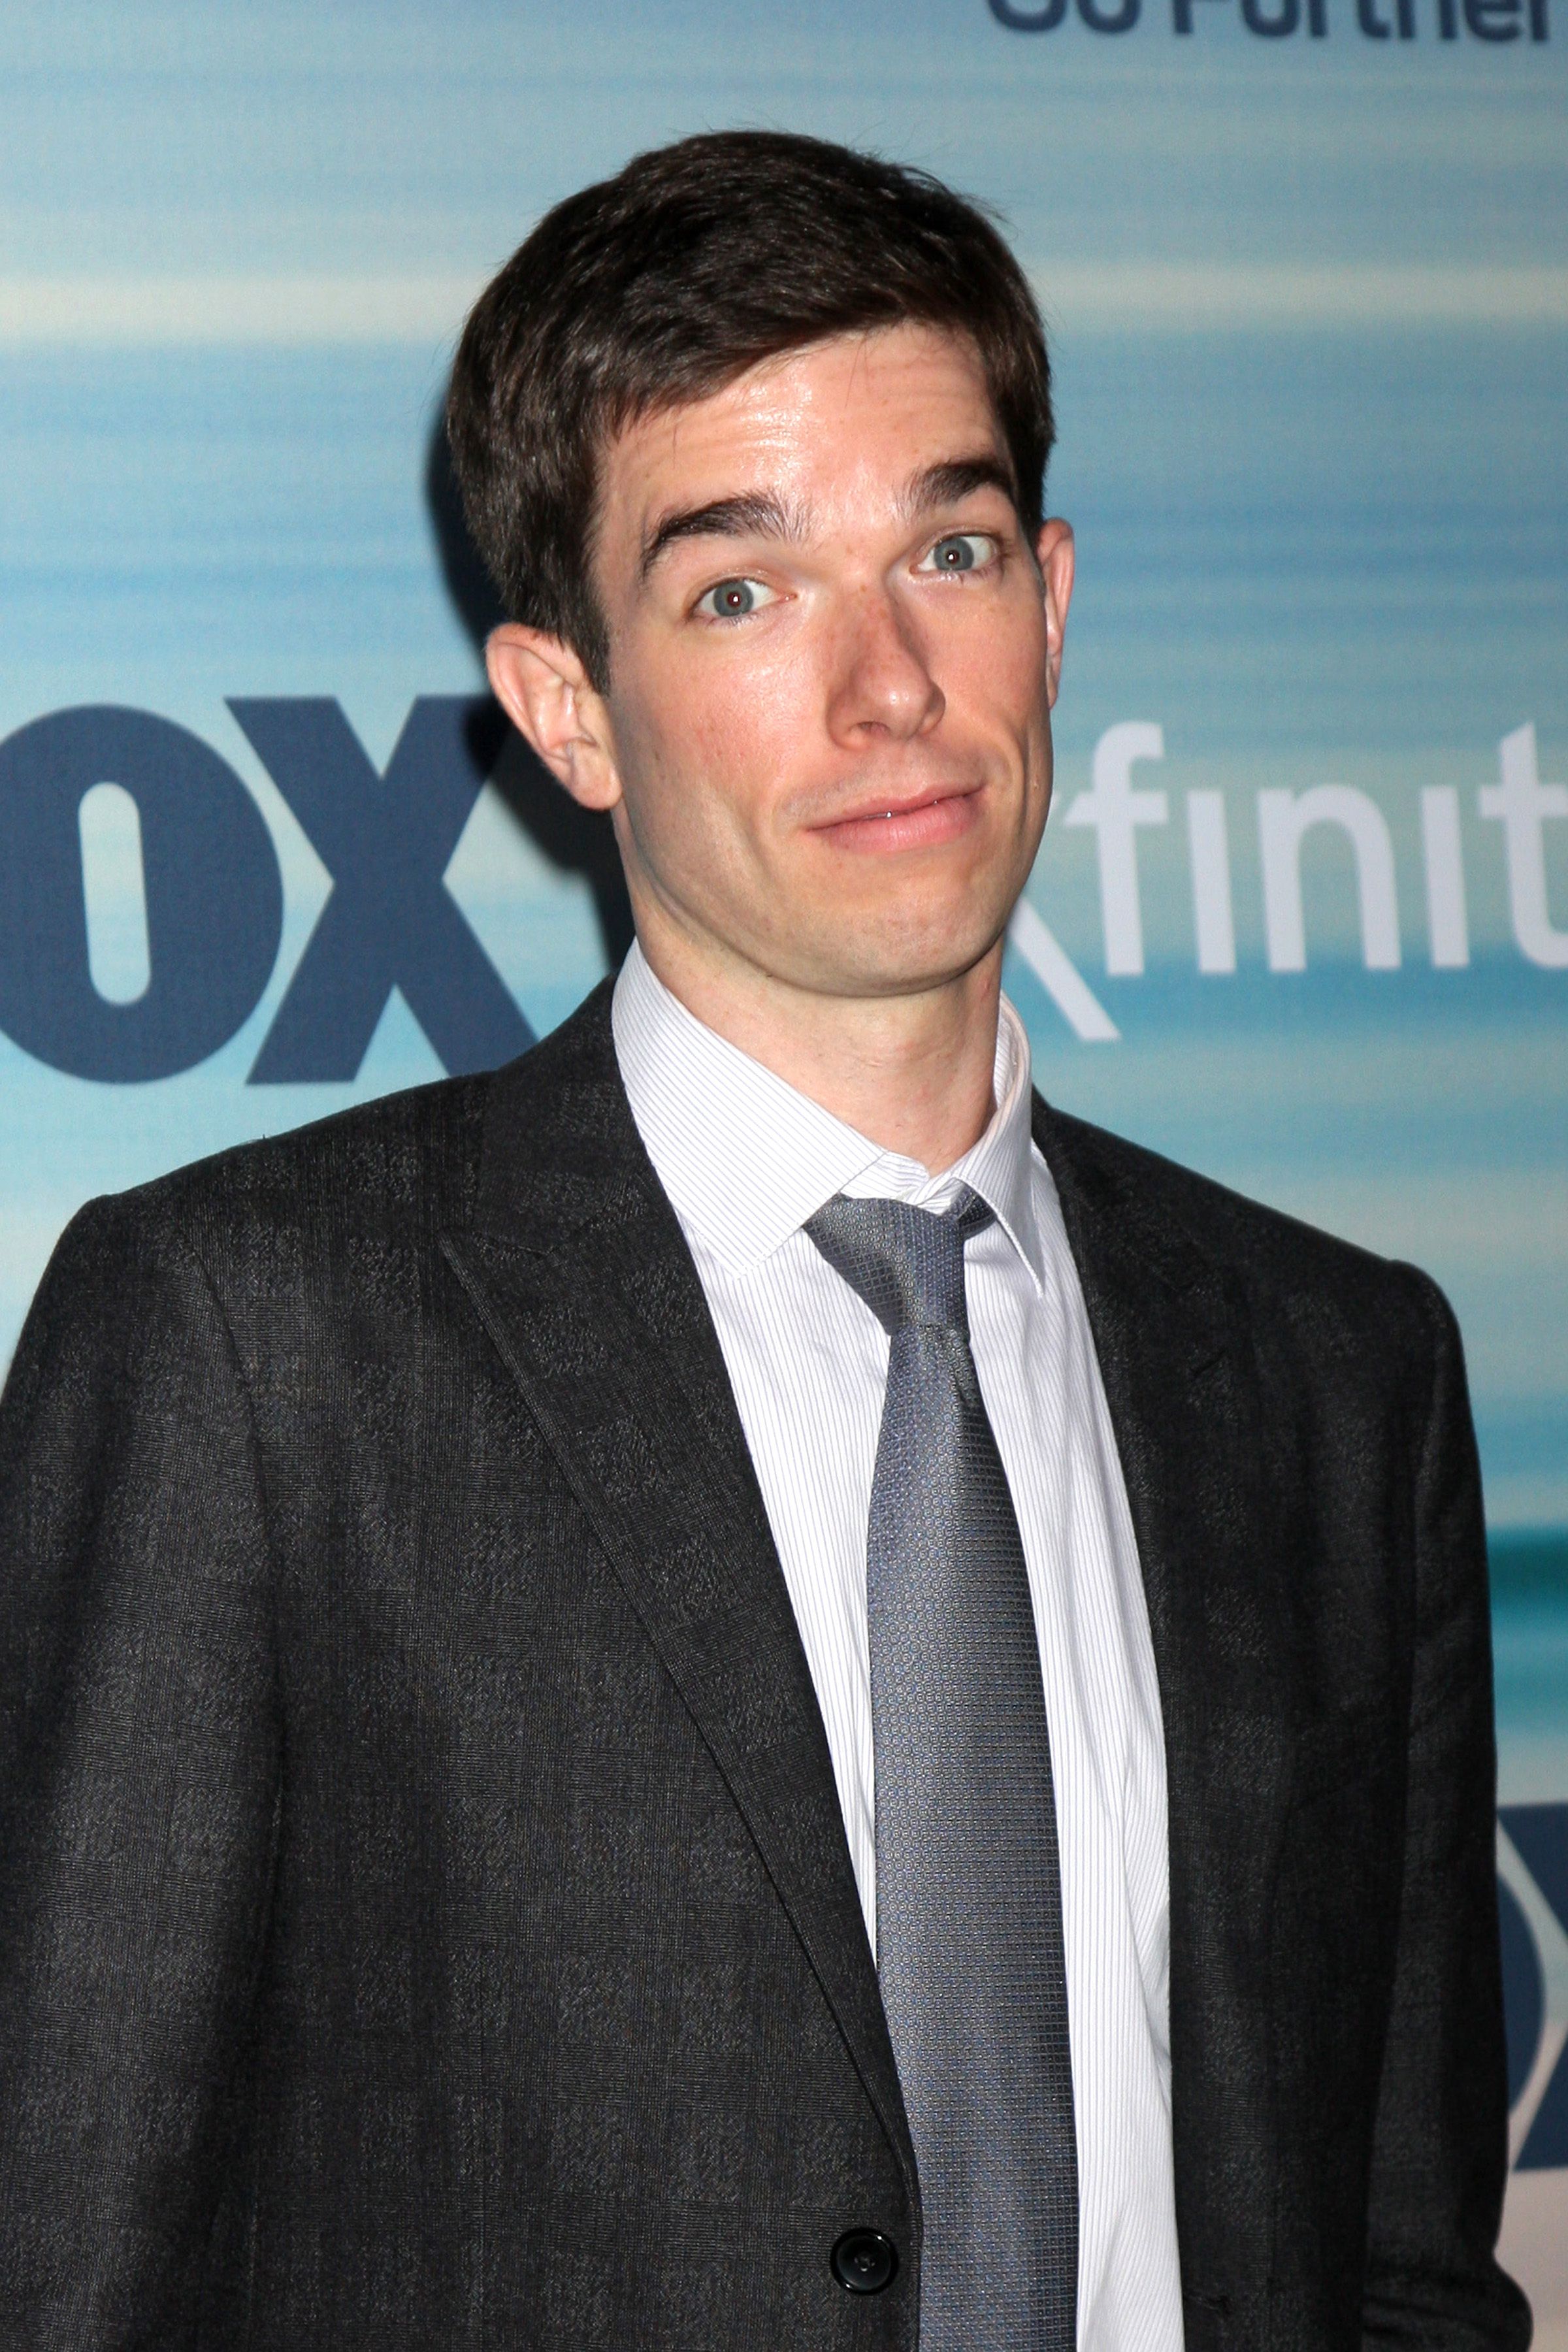 John Mulaney in suit and tie